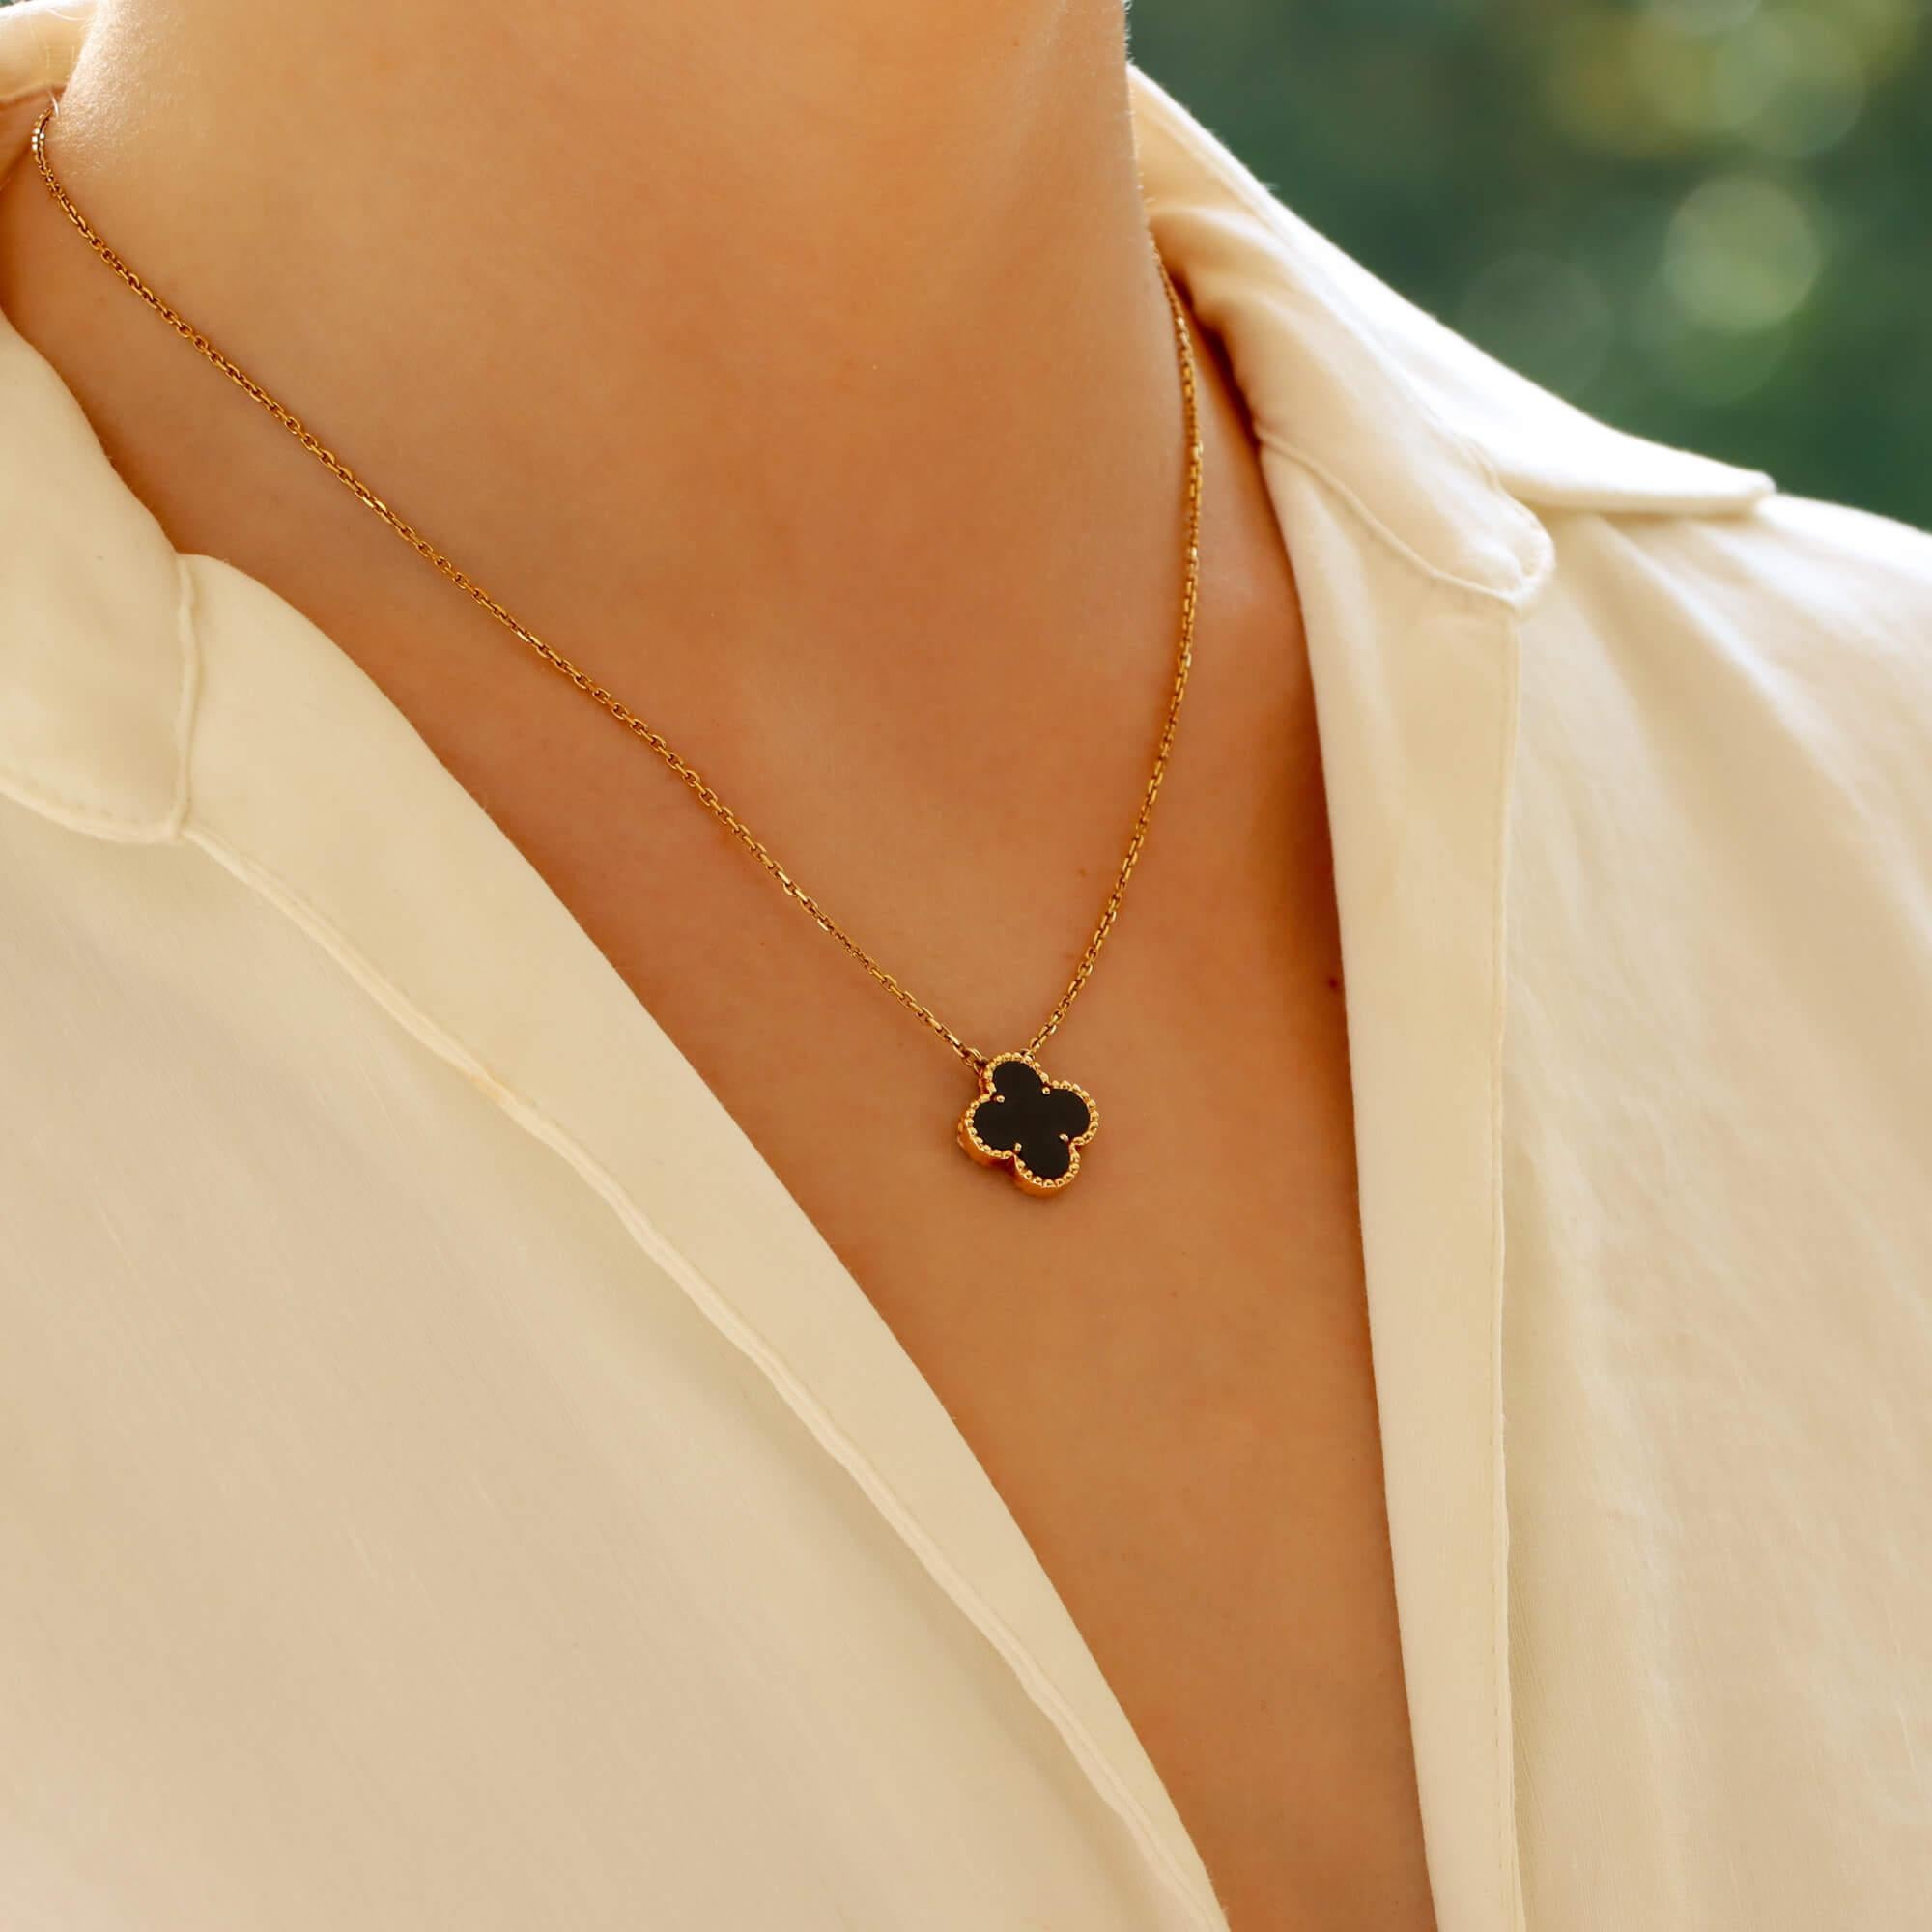 A beautiful vintage Van Cleef & Arpels onyx Alhambra pendant set in 18k yellow gold.

The pendant is set with the iconic Alhambra design and hangs from a 16-18-inch yellow gold trace chain.

Due to the design and size this pendant would make a